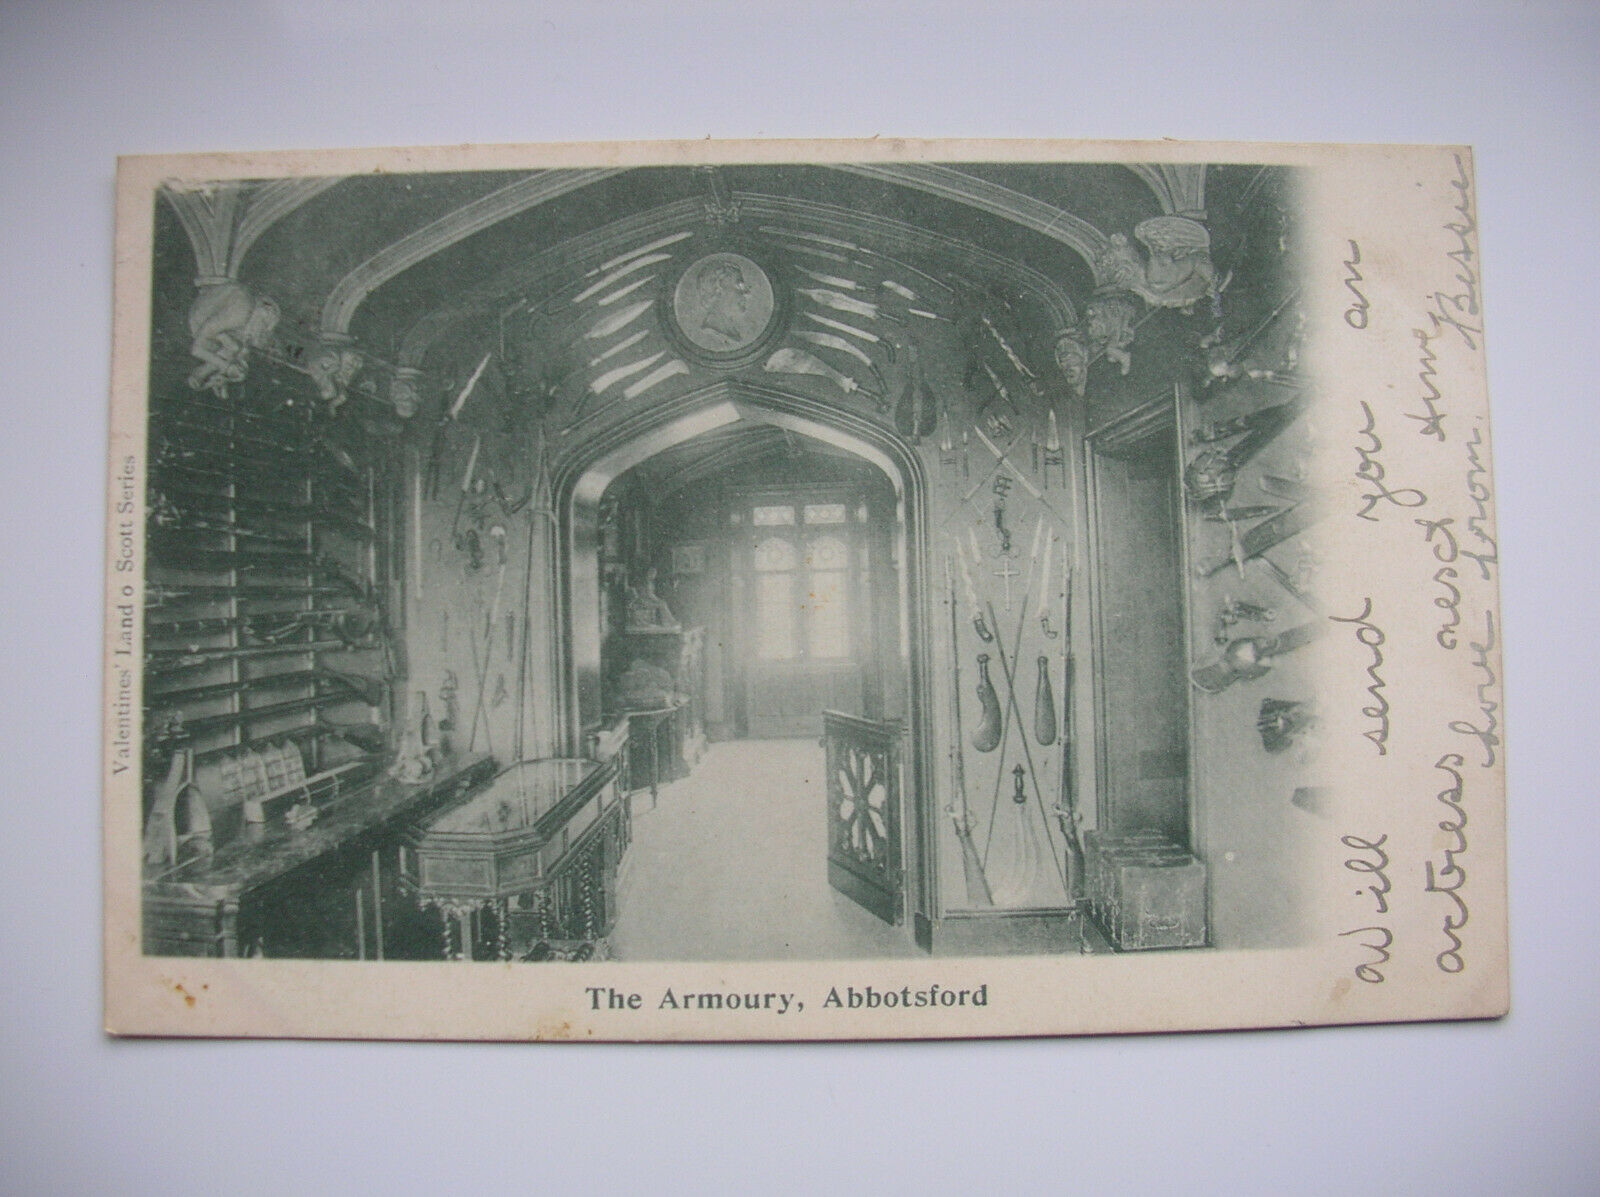 House Clearance - Abbotsford, The Armoury – Sir Walter Scott.  (1902 - Valentine)